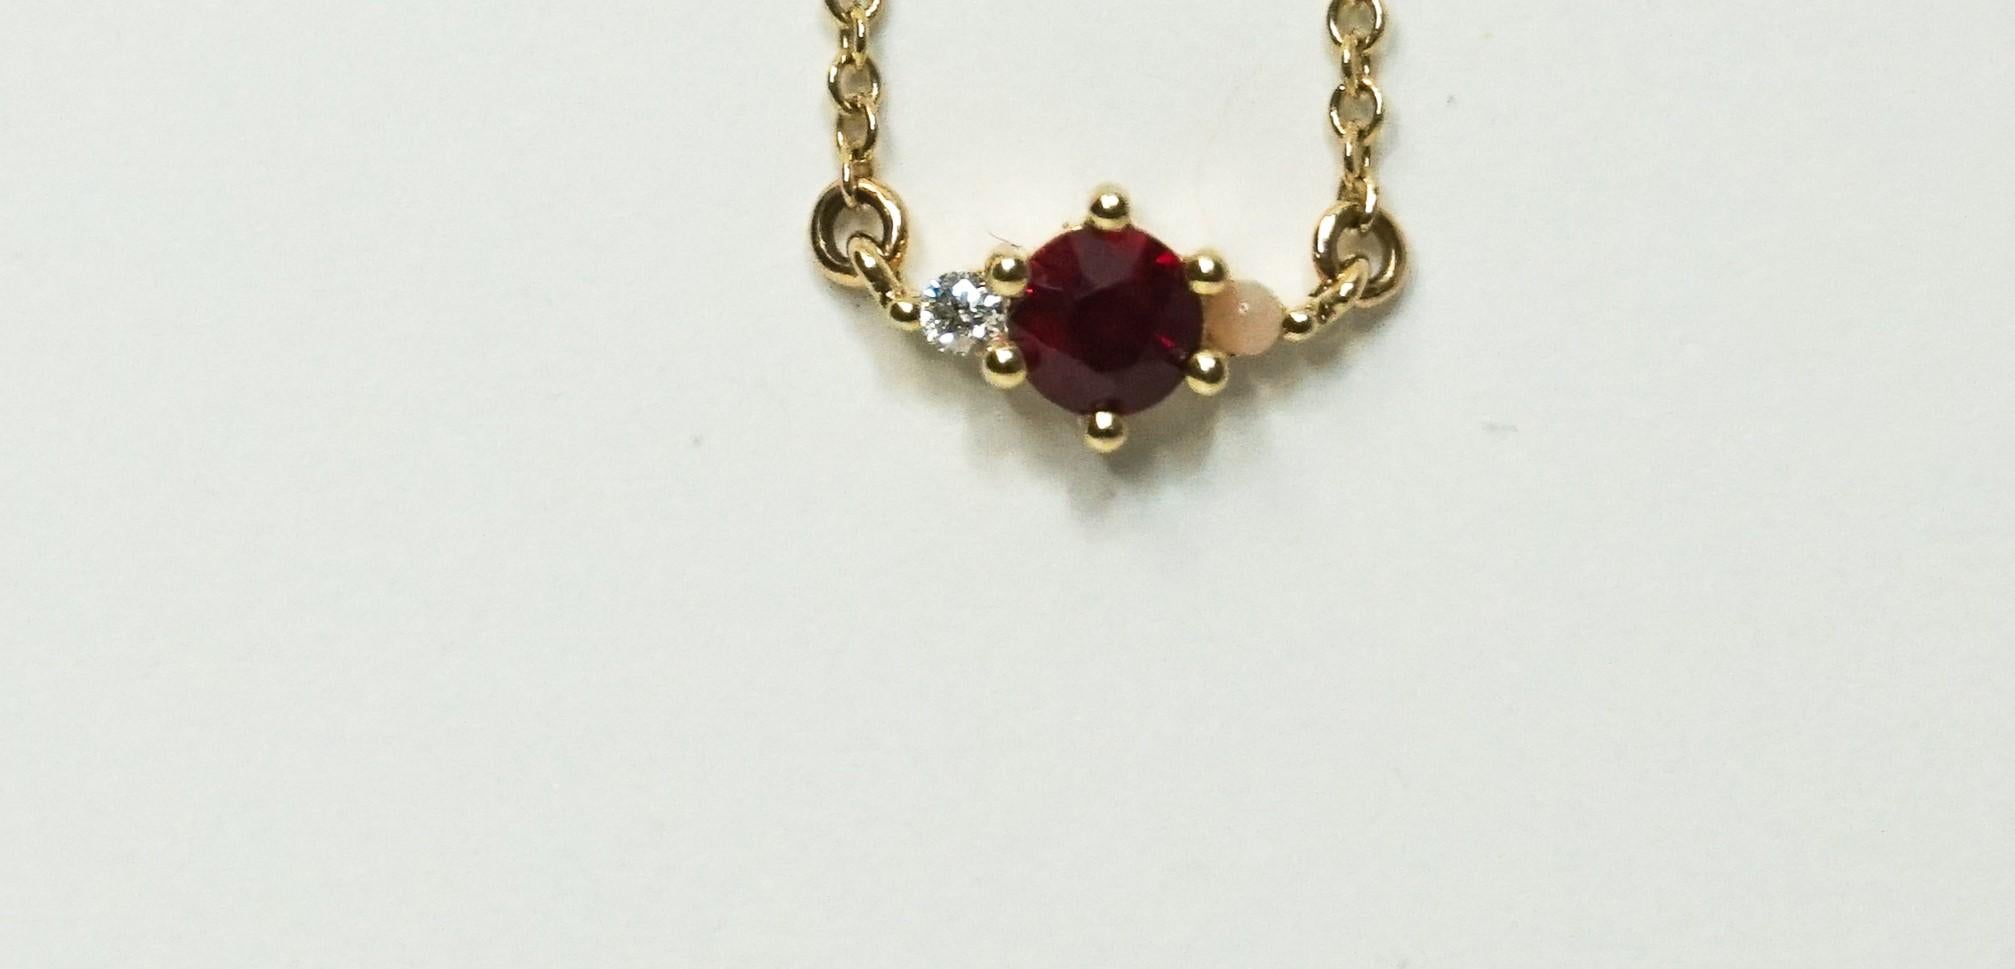 Adina Reyter One of a Kind Diamond + Ruby + Pink Opal Trio Necklace In New Condition For Sale In Sherman Oaks, CA